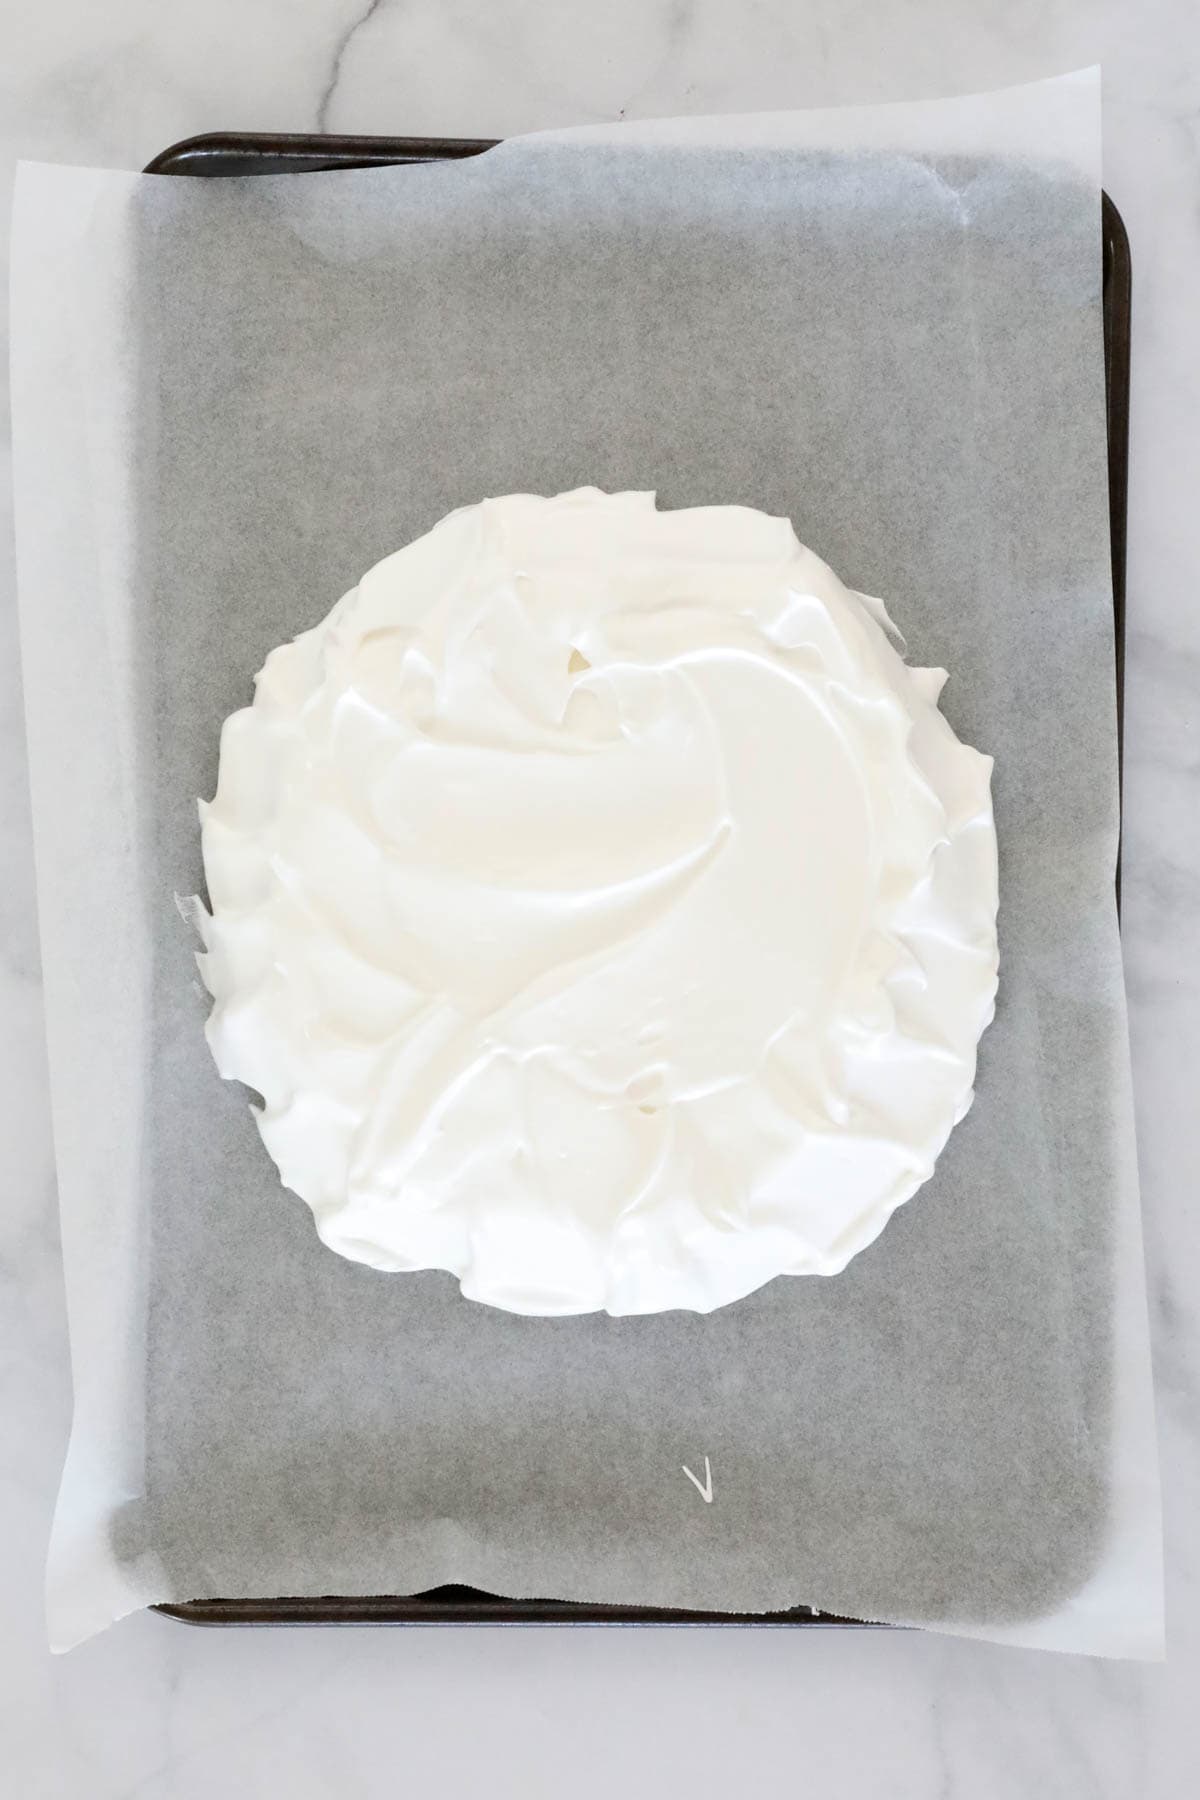 The pavlova mixture spooned onto a paper lined tray and flattened out into a dome-shape.